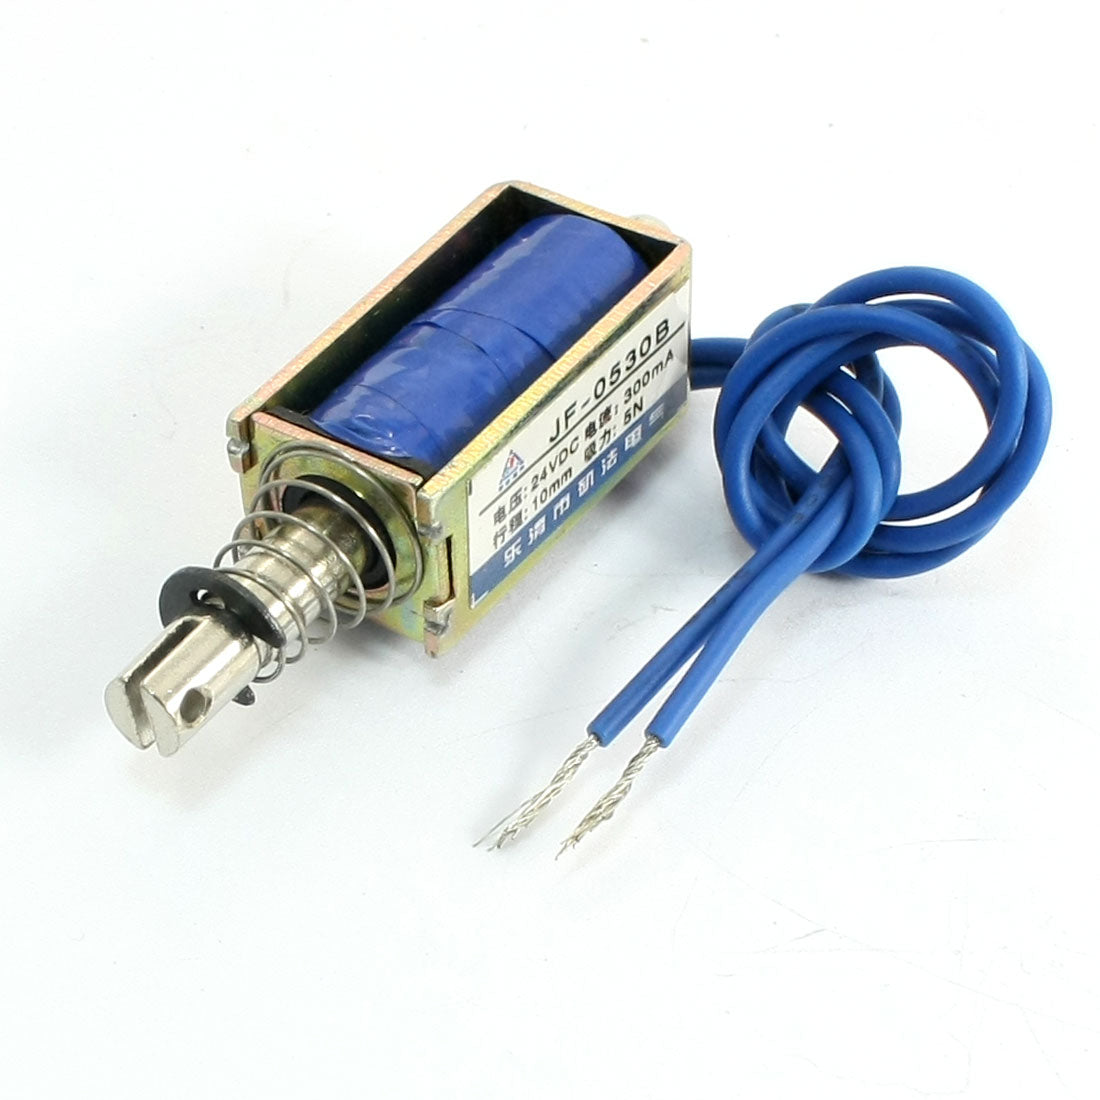 uxcell Uxcell JF-0530B Pull Push Type Electric Solenoid Electromagnet 10mm 5N DC24V 2.1x2.5cm